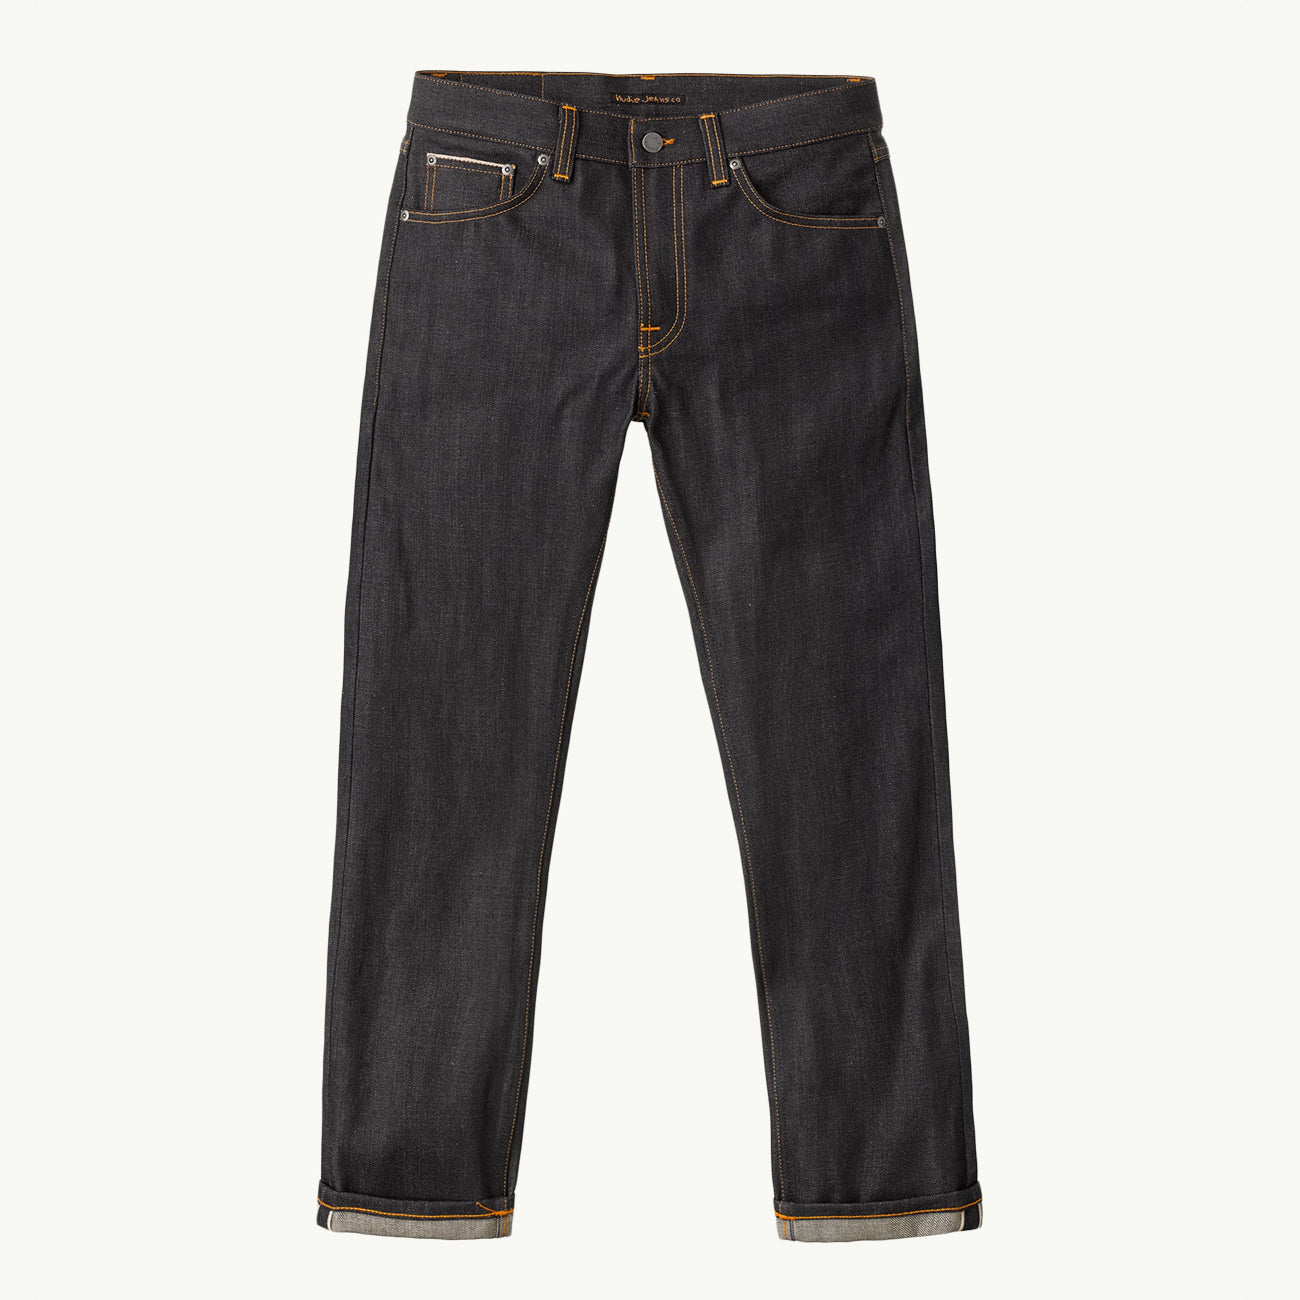 Gritty Jackson - Dry Selvage